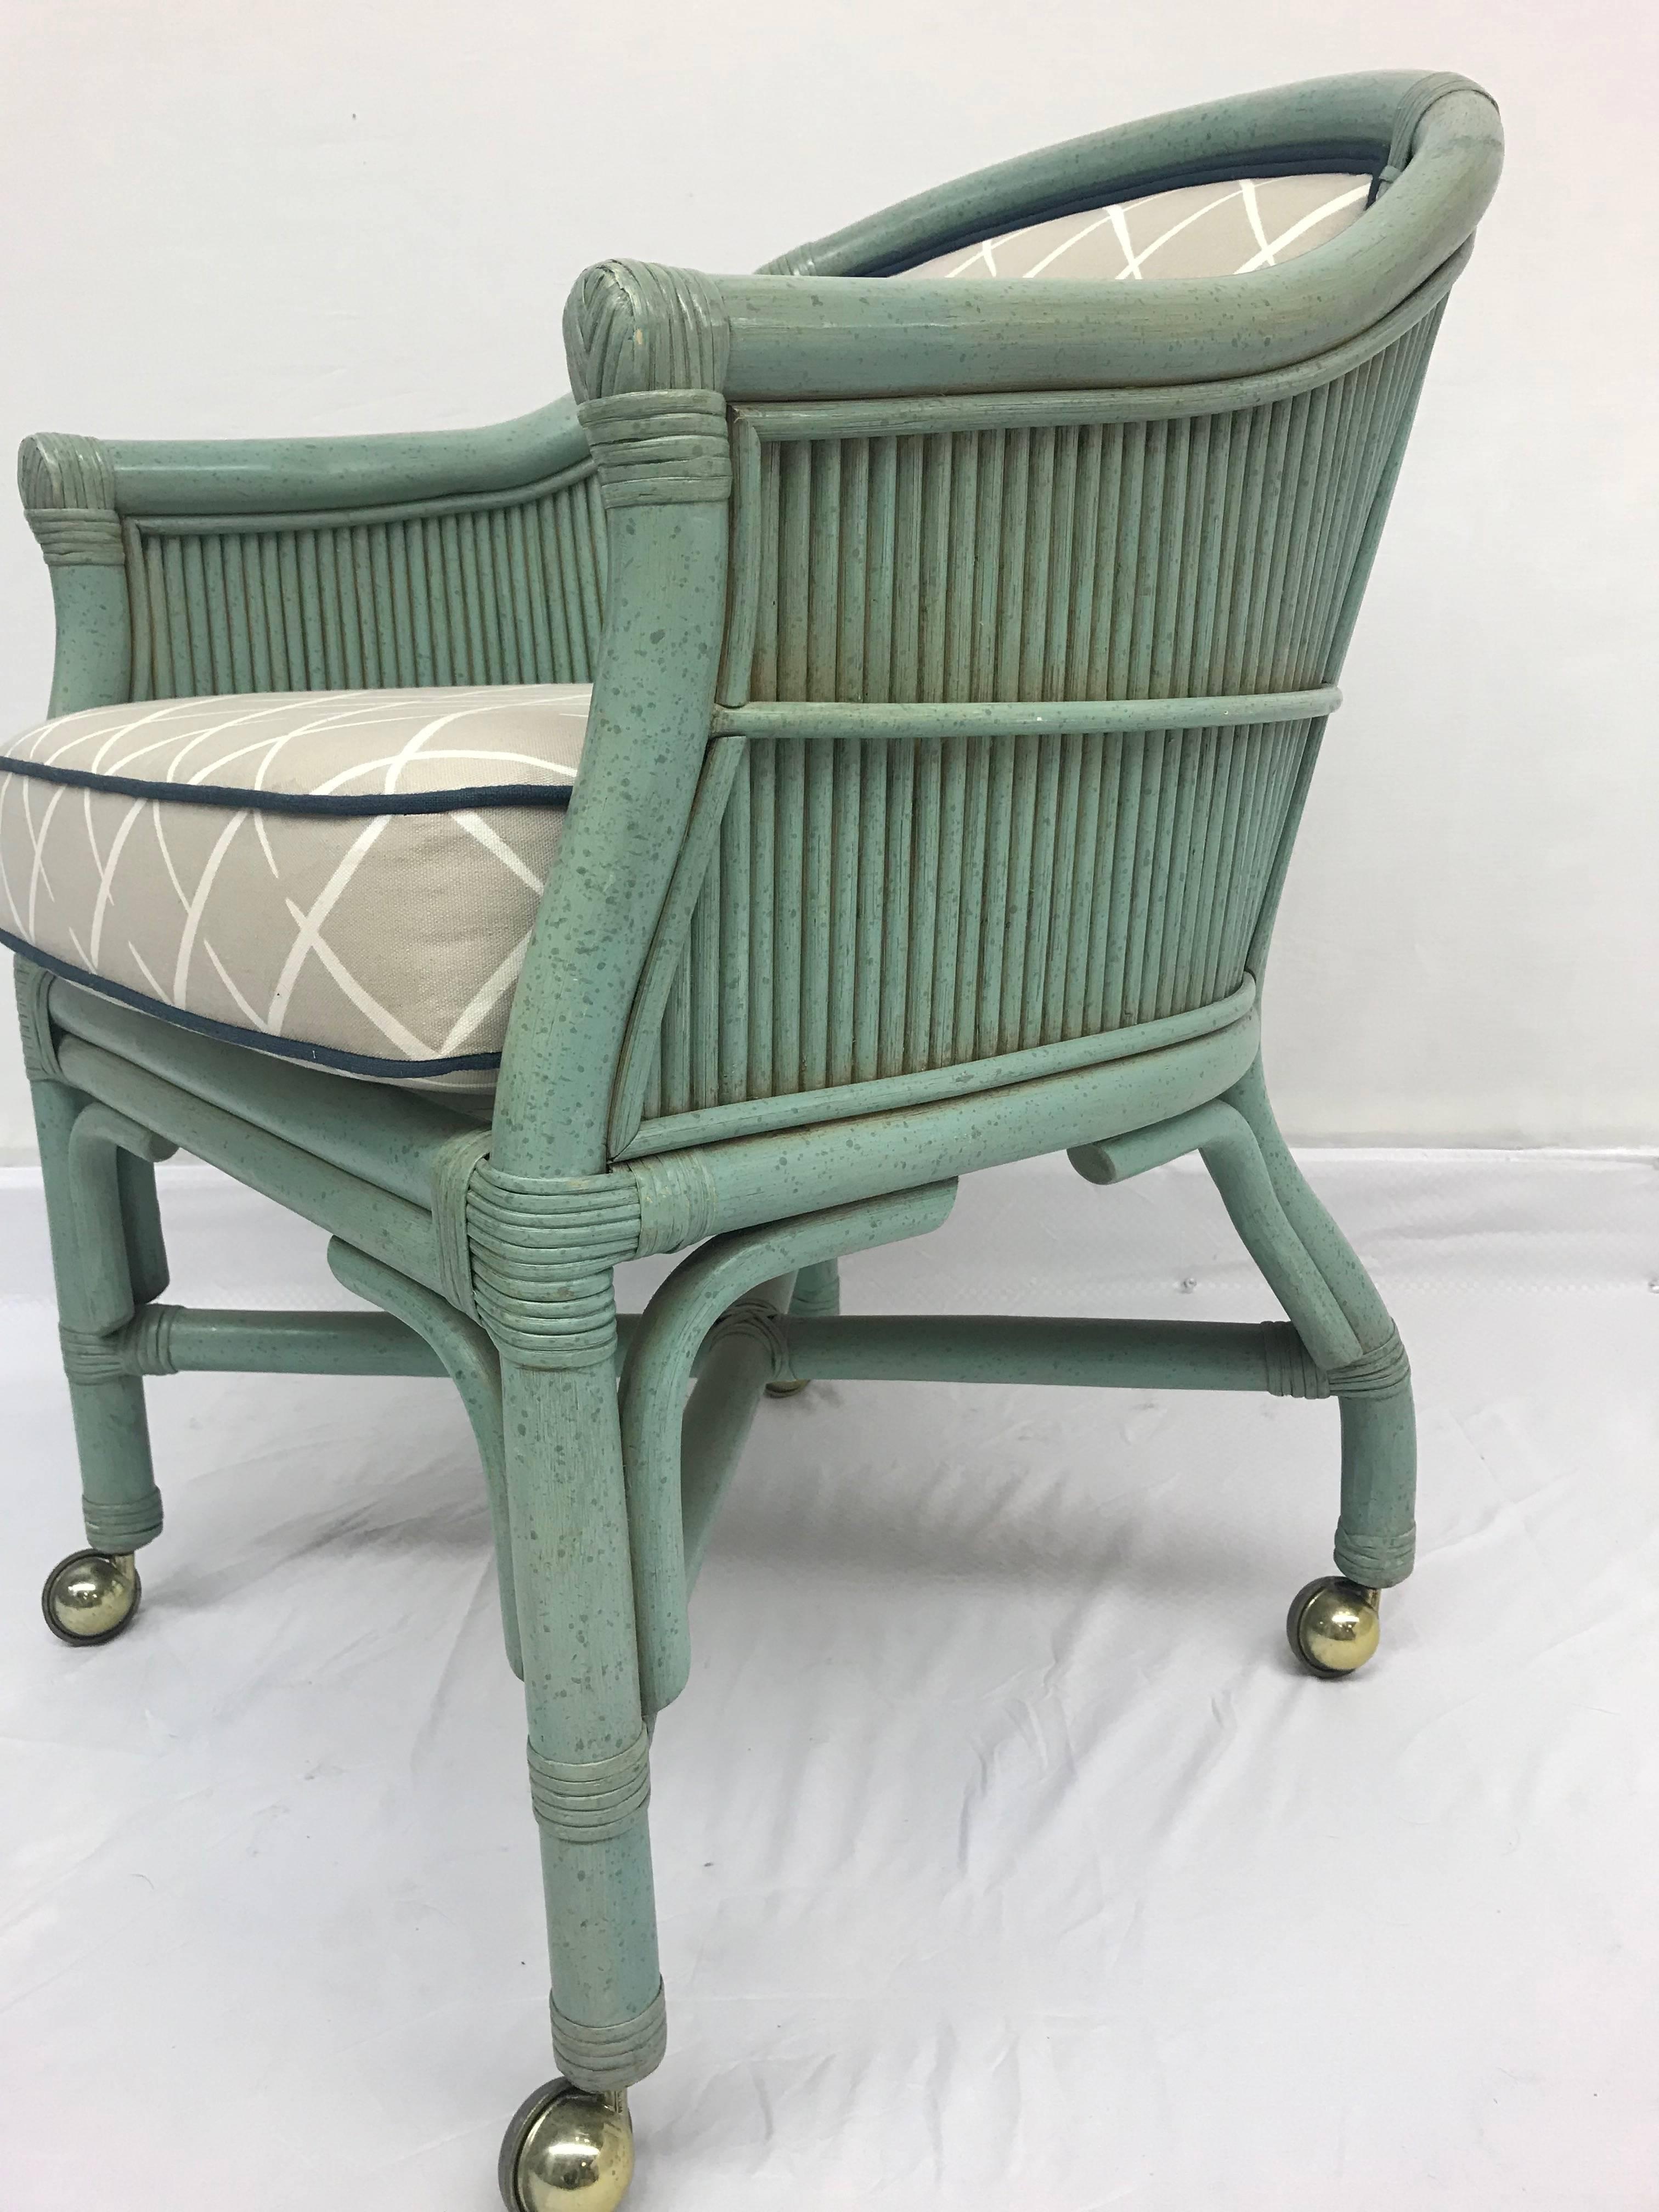 Vintage Seafoam Blue Rattan Chairs With Casters - Set of 4 For Sale 3